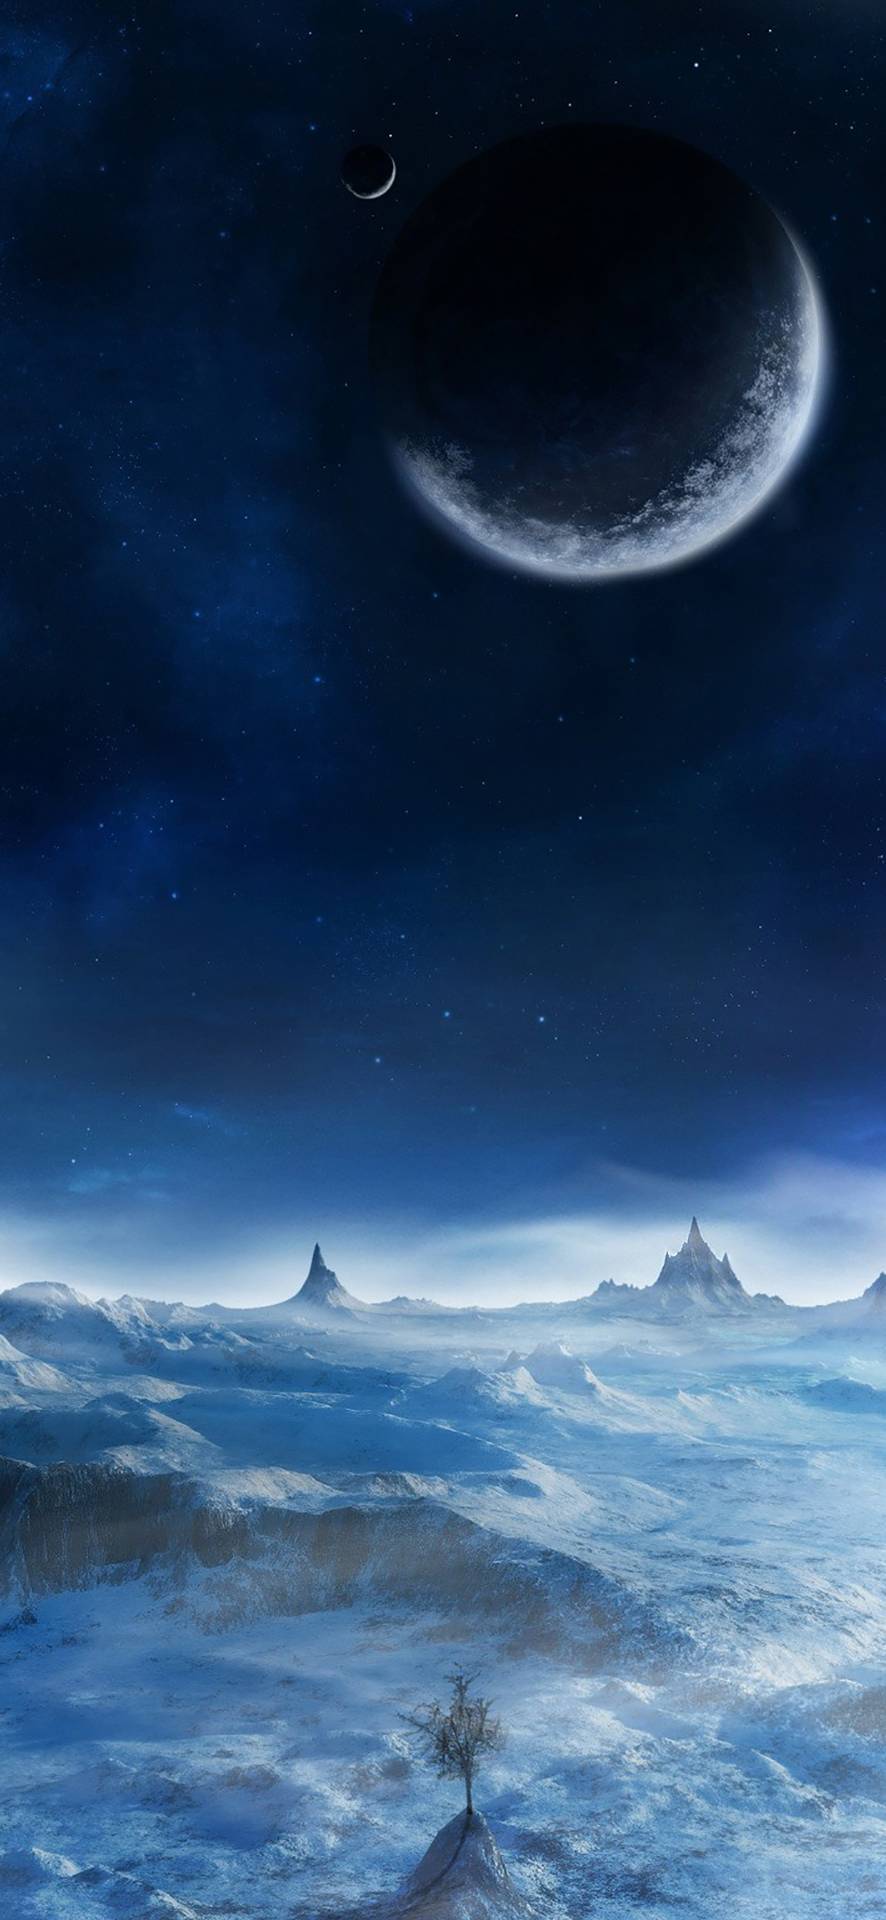 Space Wallpaper for Phone- 181